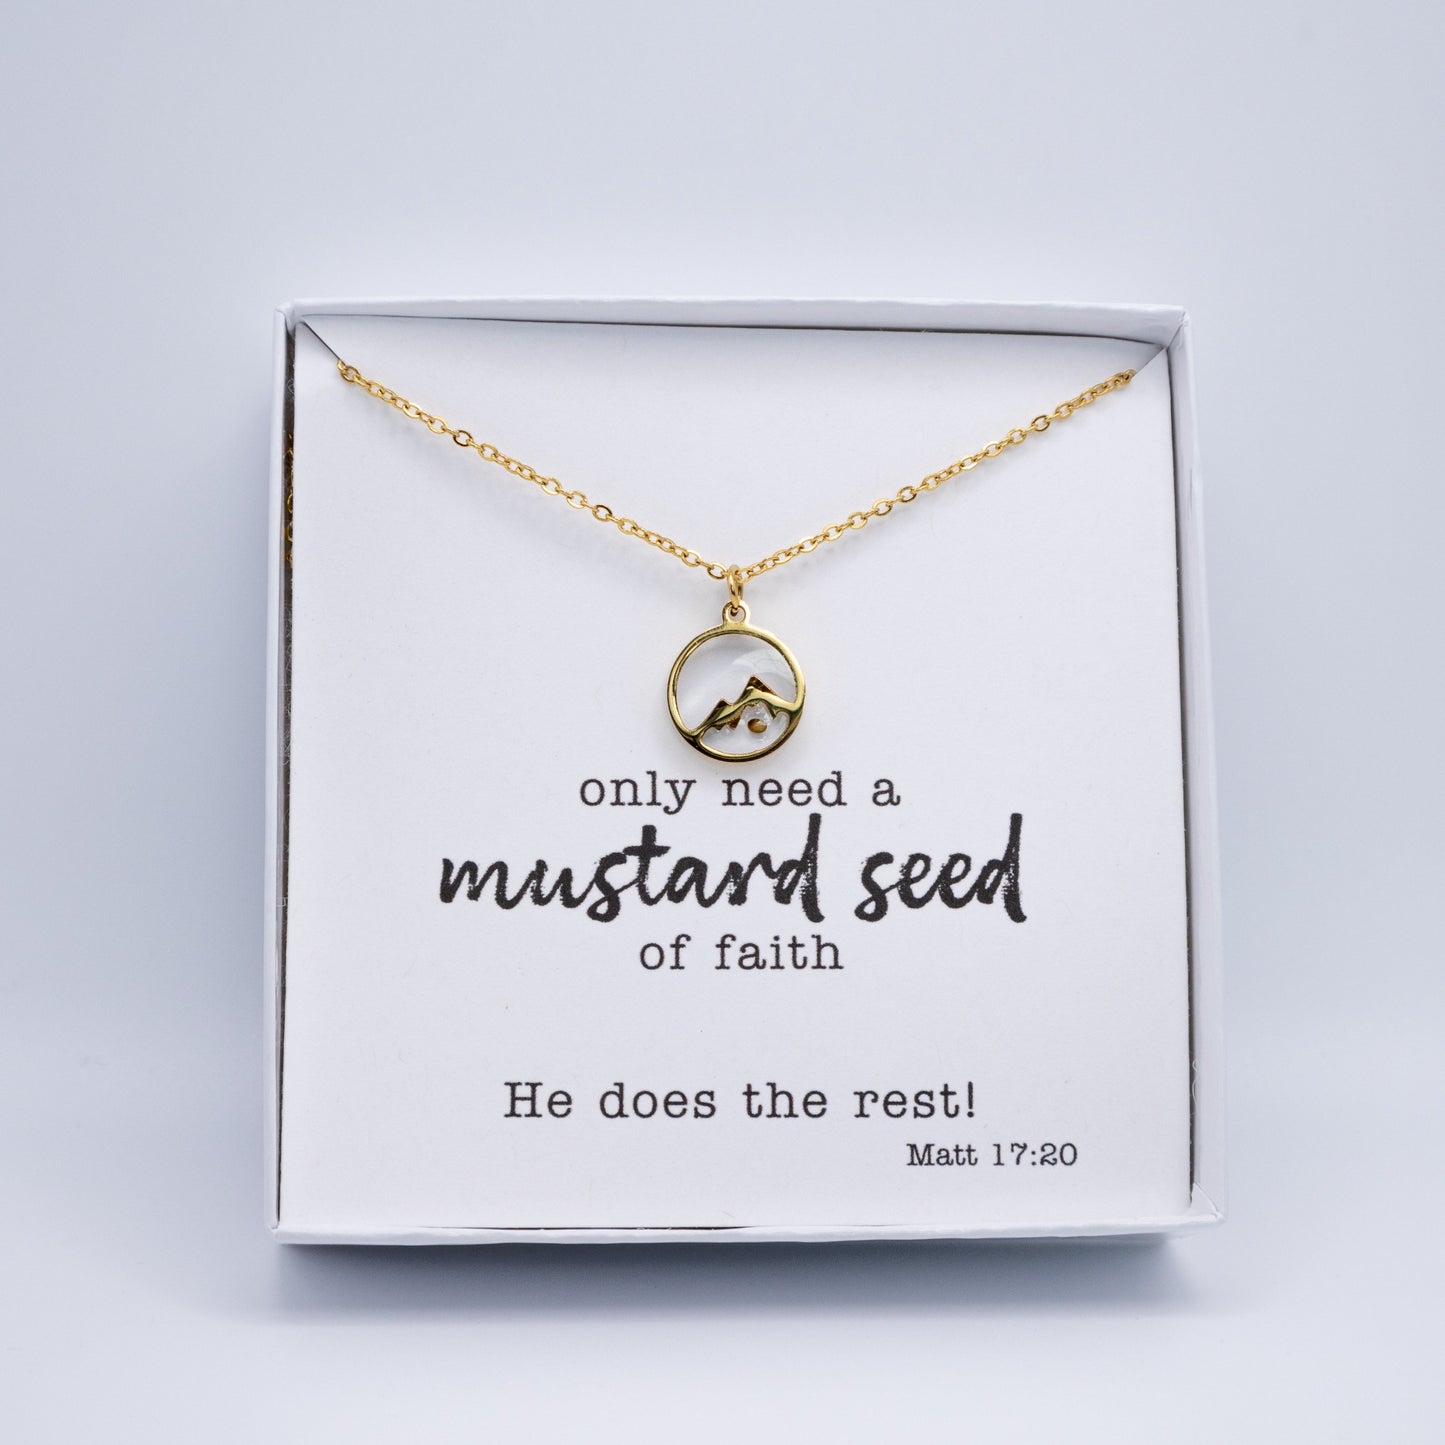 Only Need A Seed - Mustard Seed Necklace